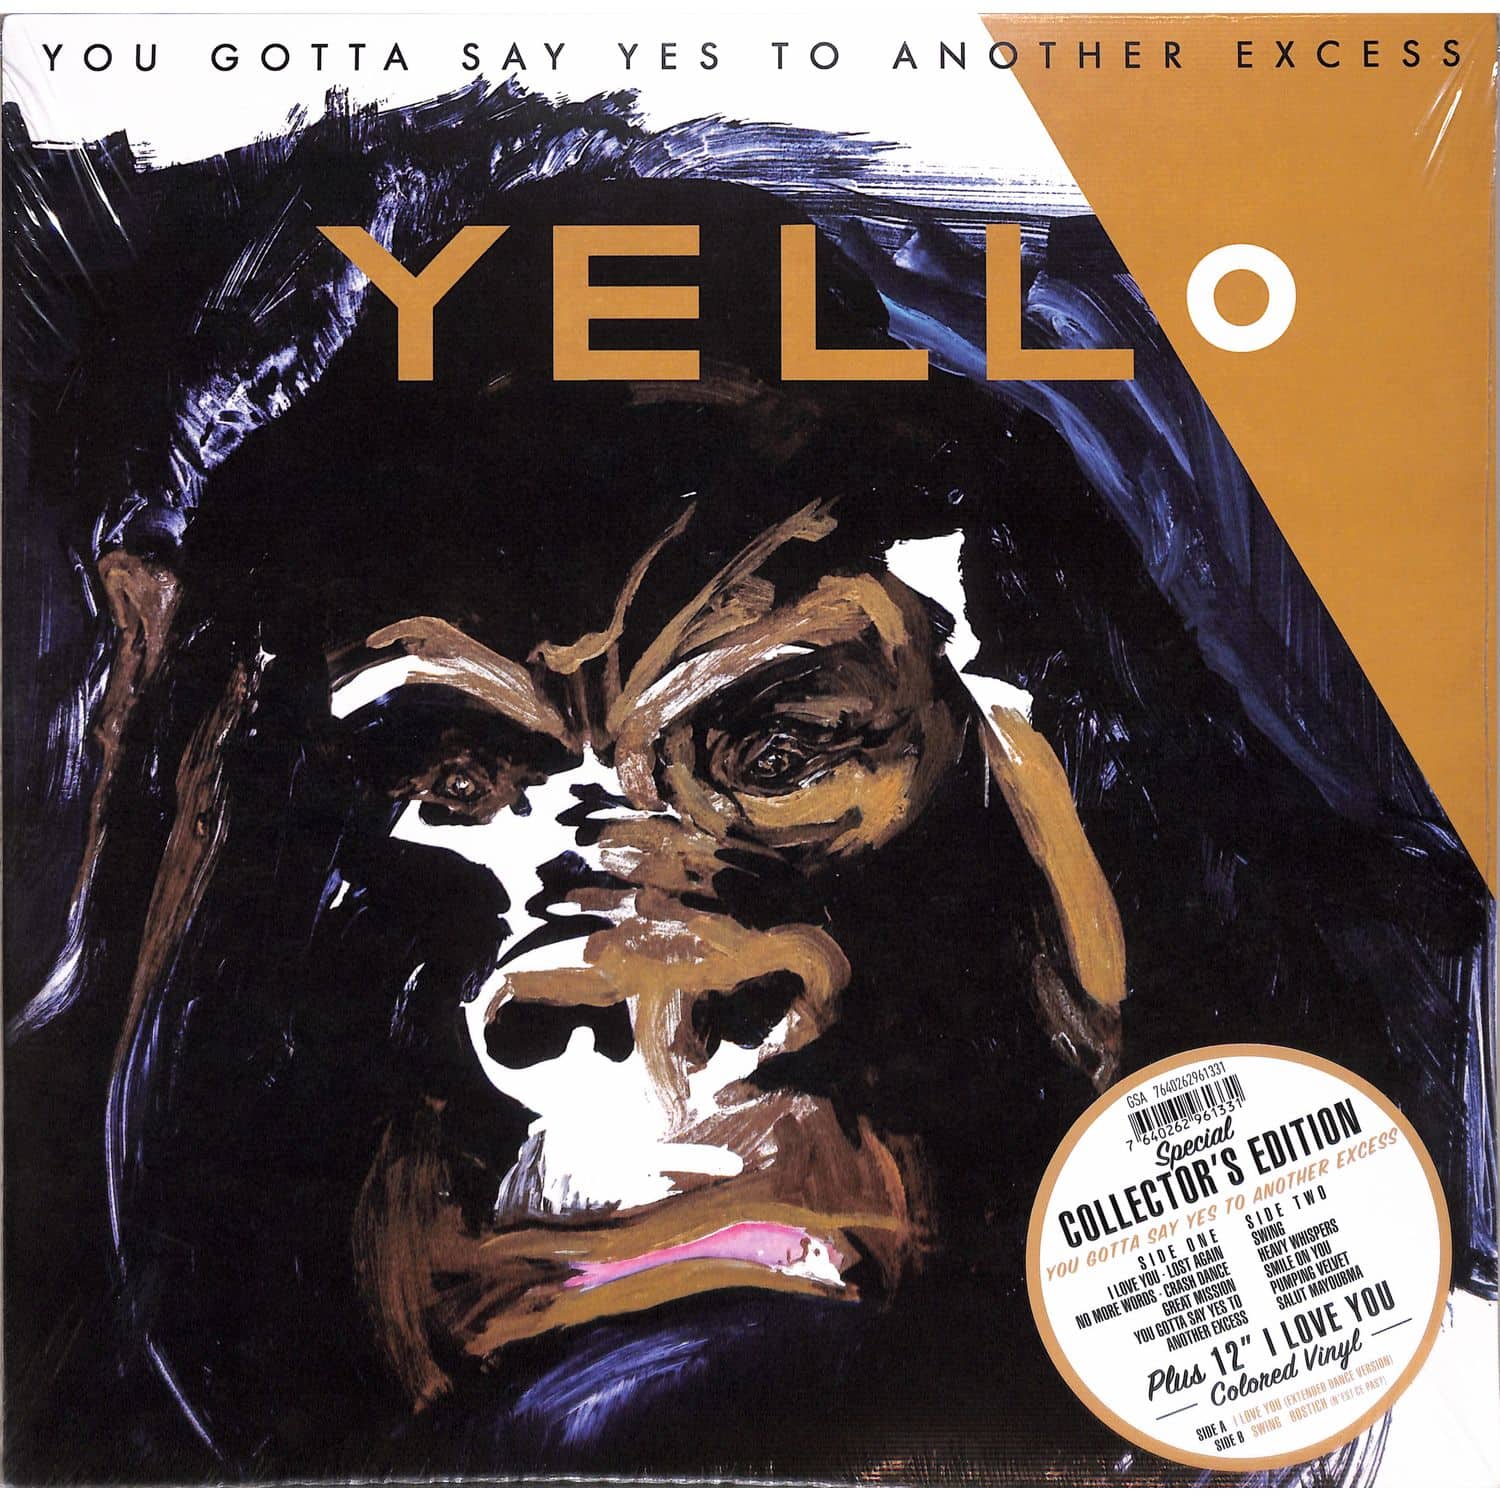 Yello - YOU GOTTA SAY YES TO ANOTHER EXCESS 